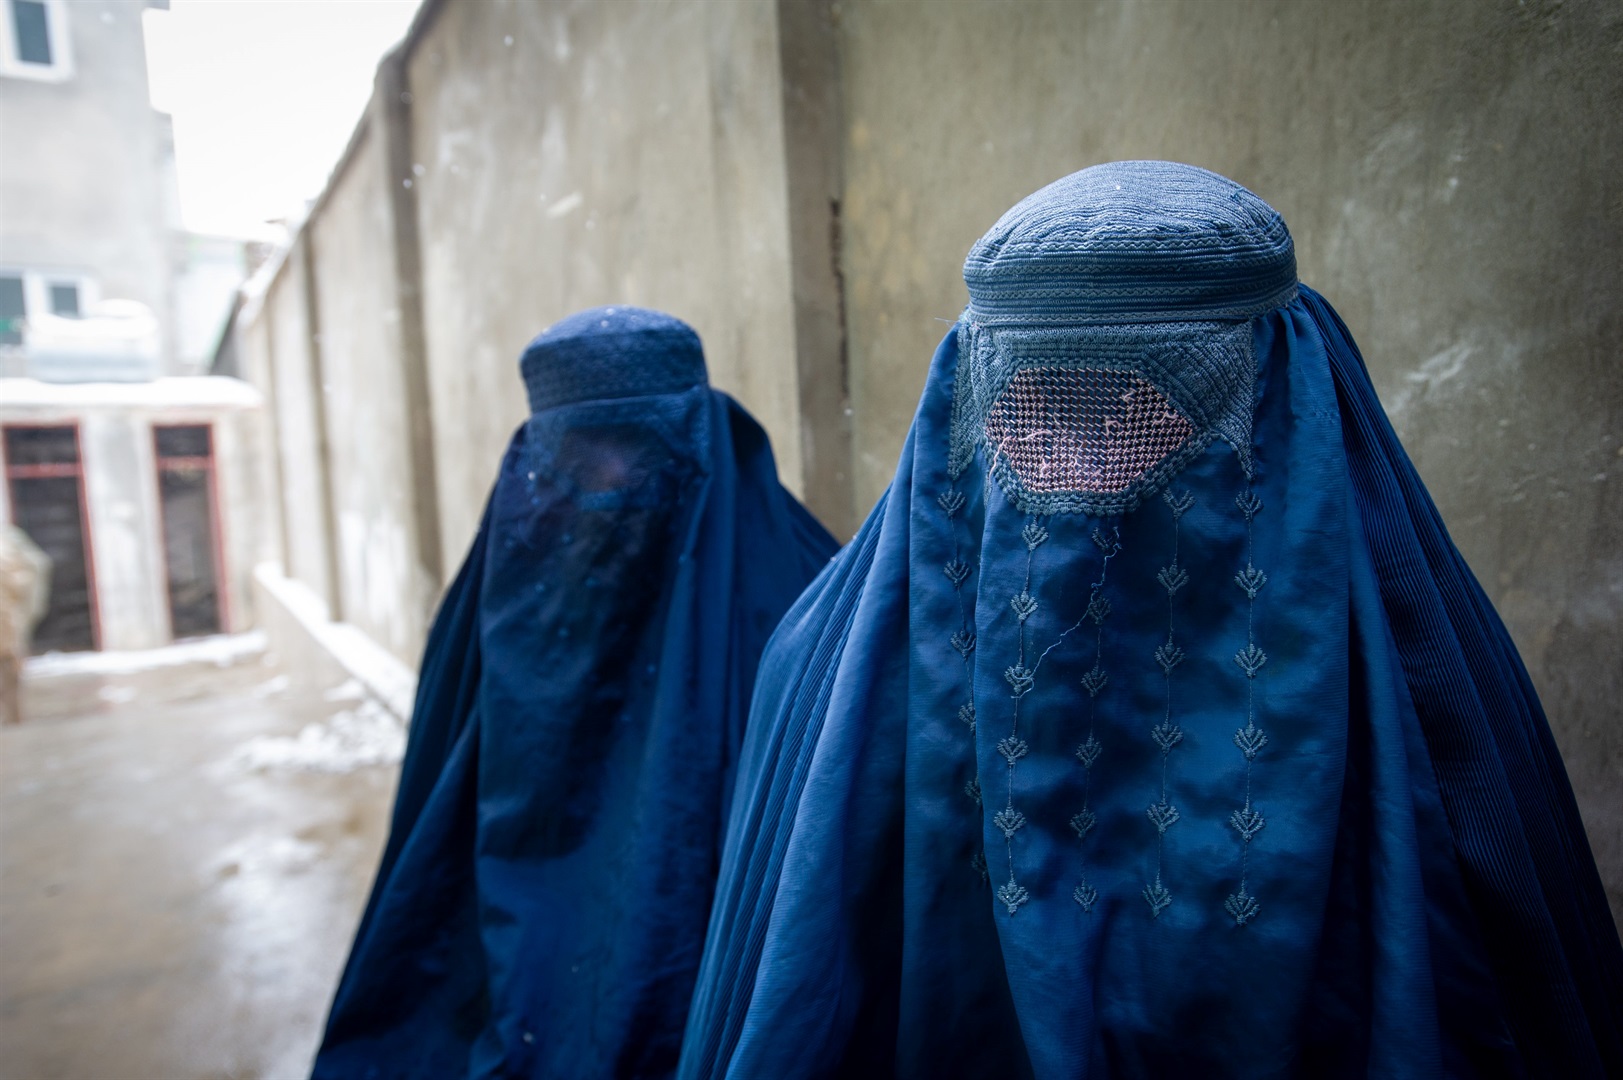 Taliban orders Afghan women to veil their faces – male relatives face penalties if they don’t comply